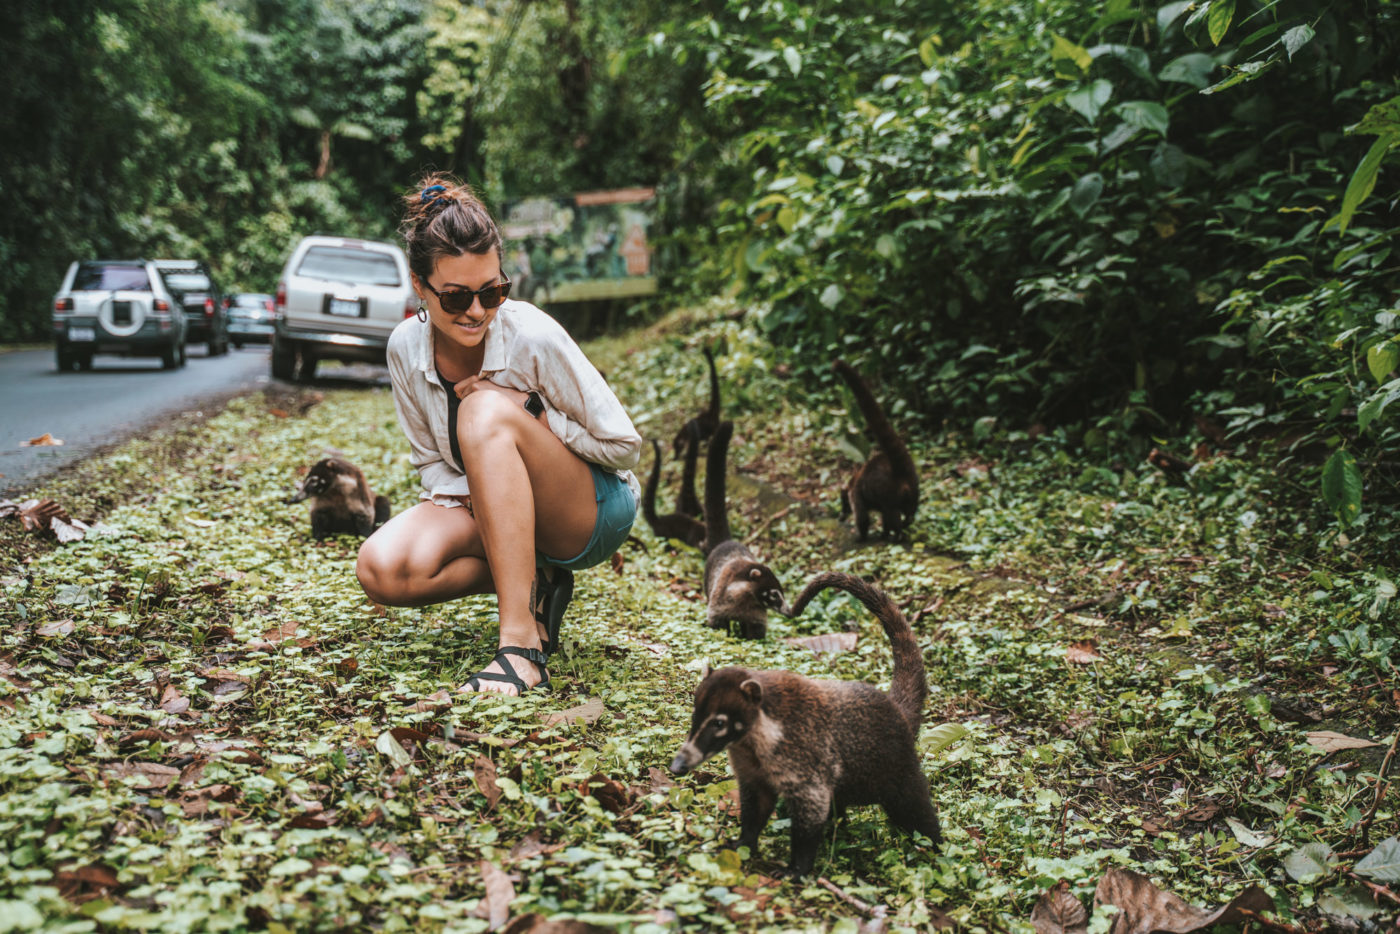 Getting friendly with pizotes on the side of the road in Arenal, Costa Rica